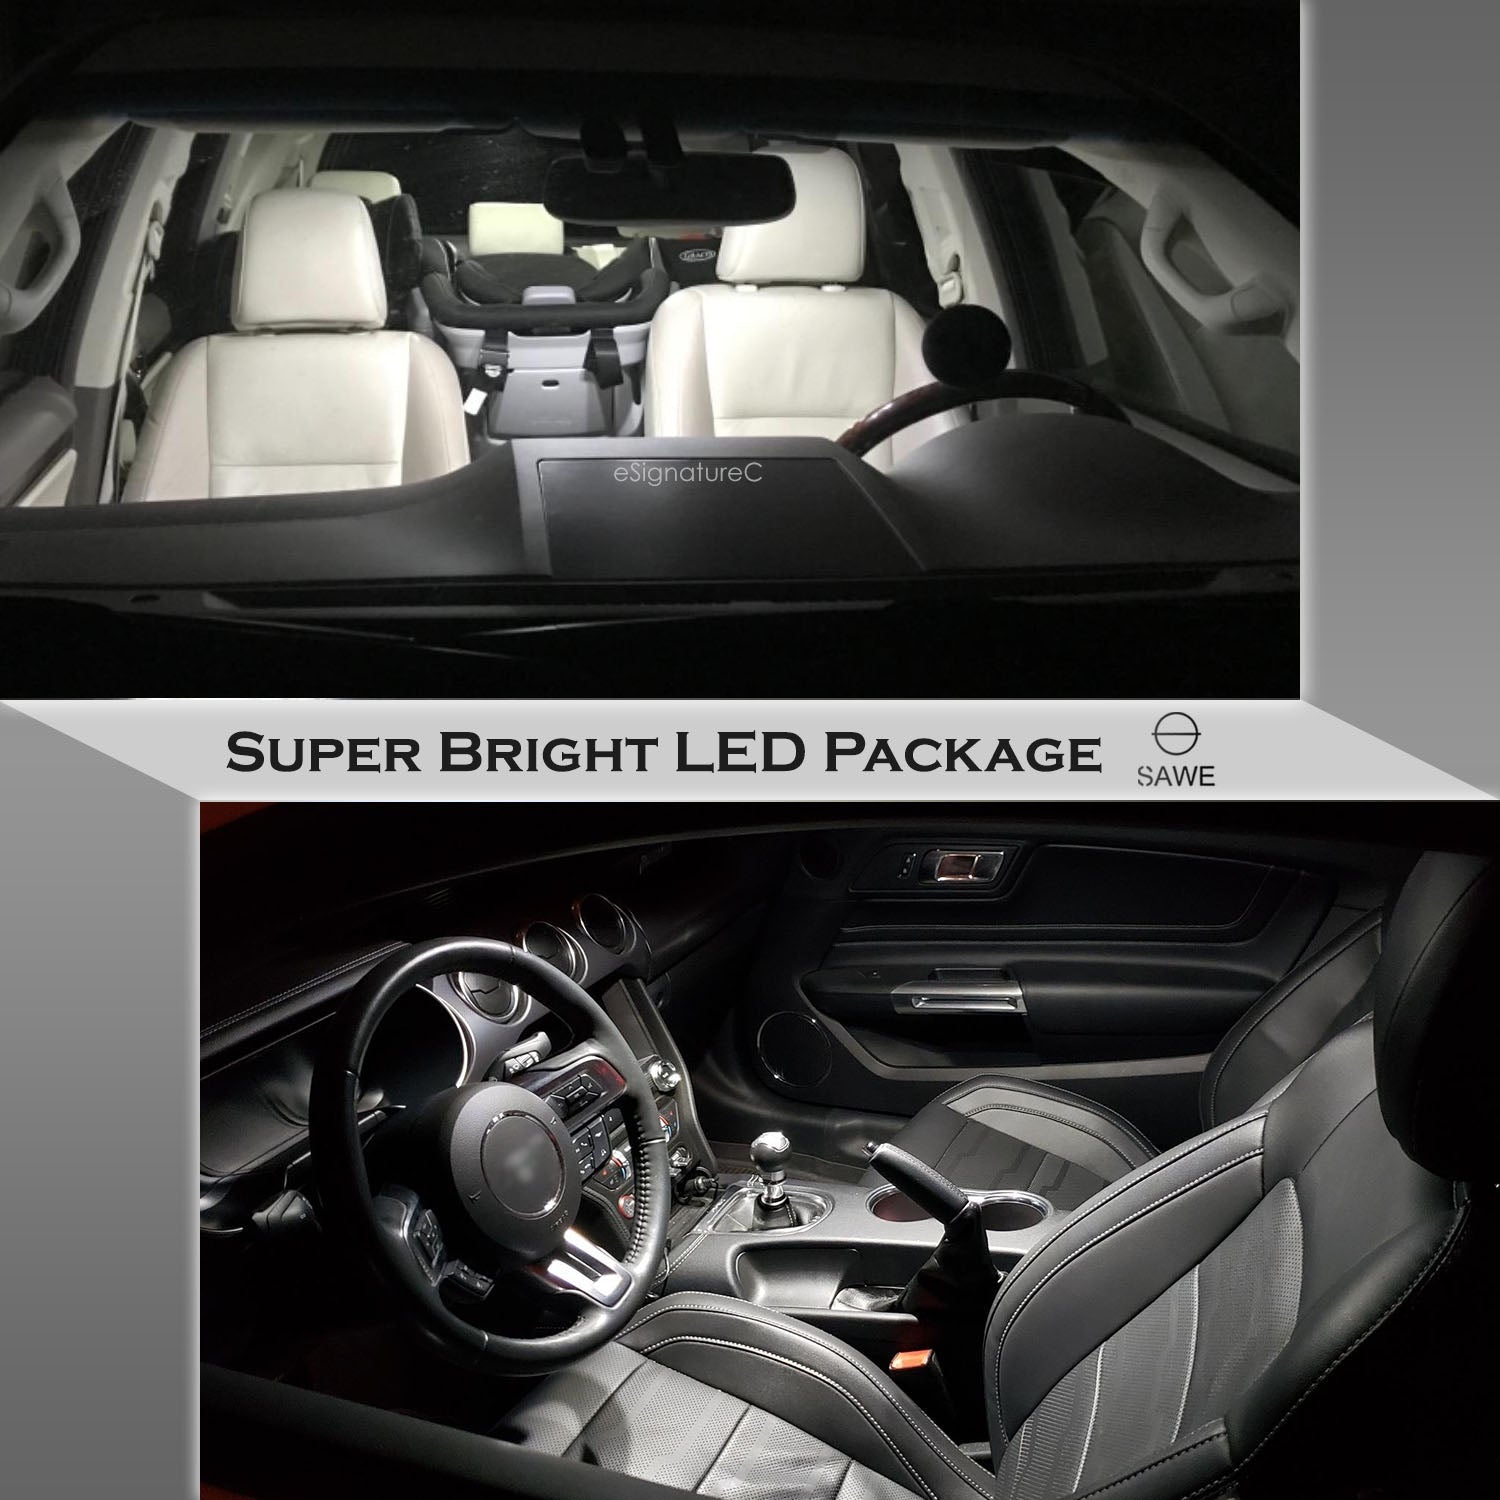 For Mazda RX8 RX-8 Interior LED Lights - Dome & Map Light Bulbs Package Kit for 2004 - 2011 - White